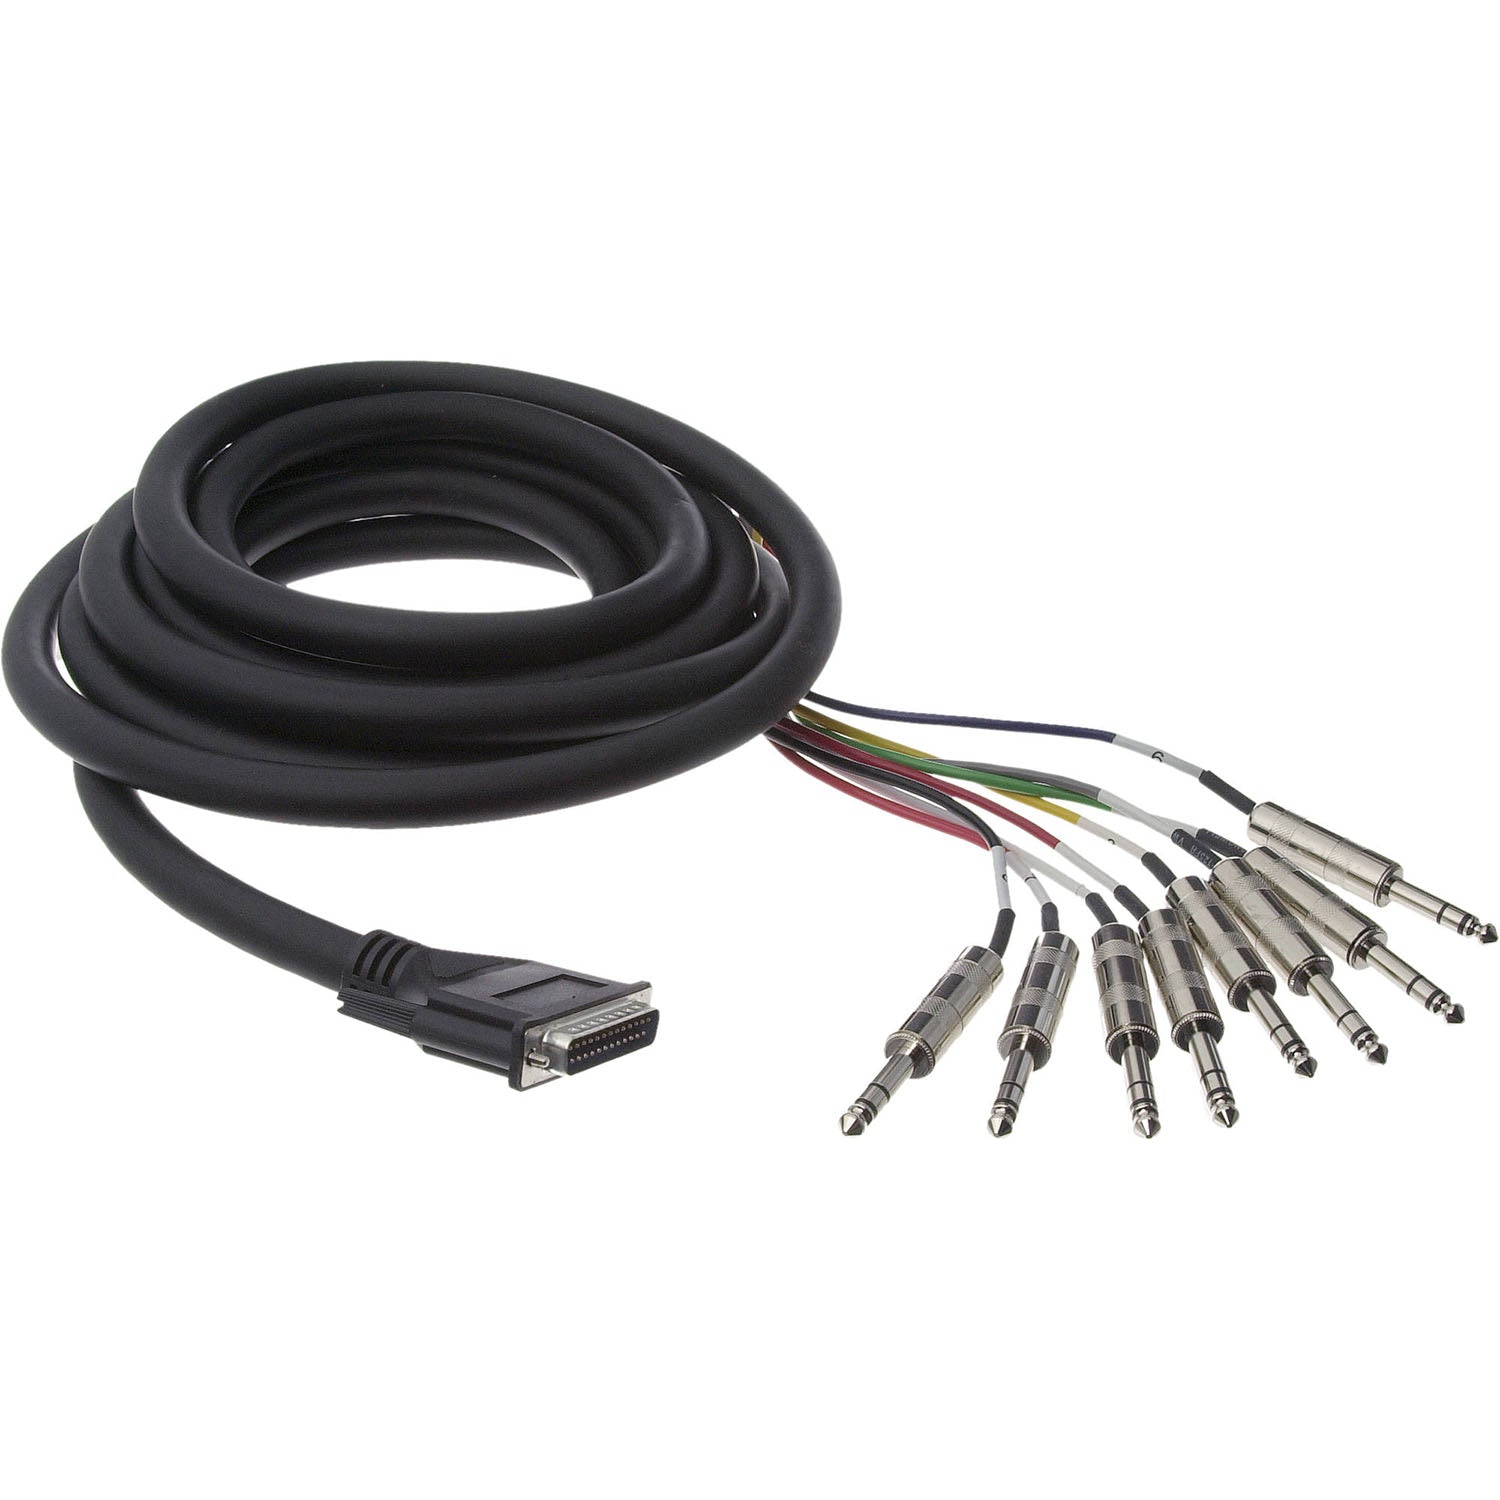 Hosa DTP803 Male DB-25 to 8-Channel Male Stereo 1/4" Phone Snake Cable - 3 m - Hollywood DJ